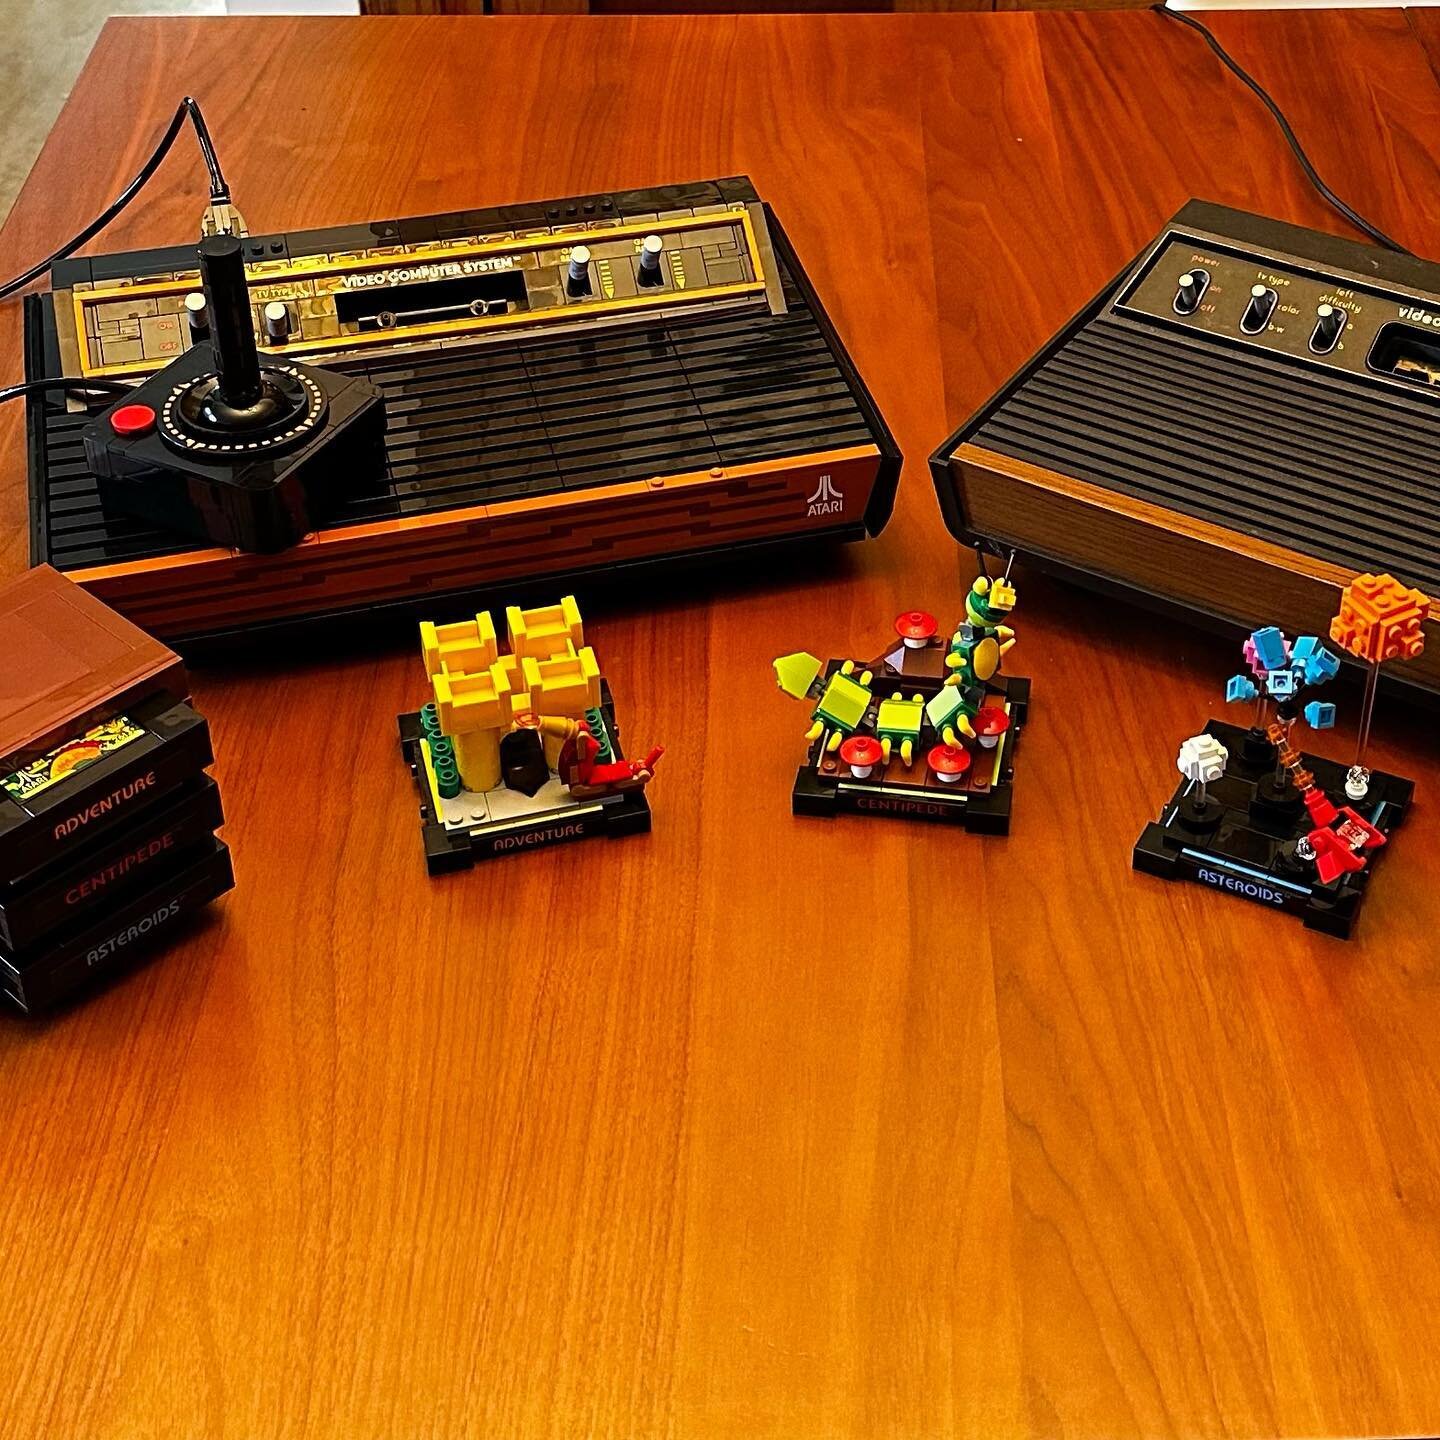 #atari2600 Six Switch CX2600 (1978) with a @lego Atari VCS (2022) a fun build with lots of interesting little Easter eggs. #videogames #videogamehistory